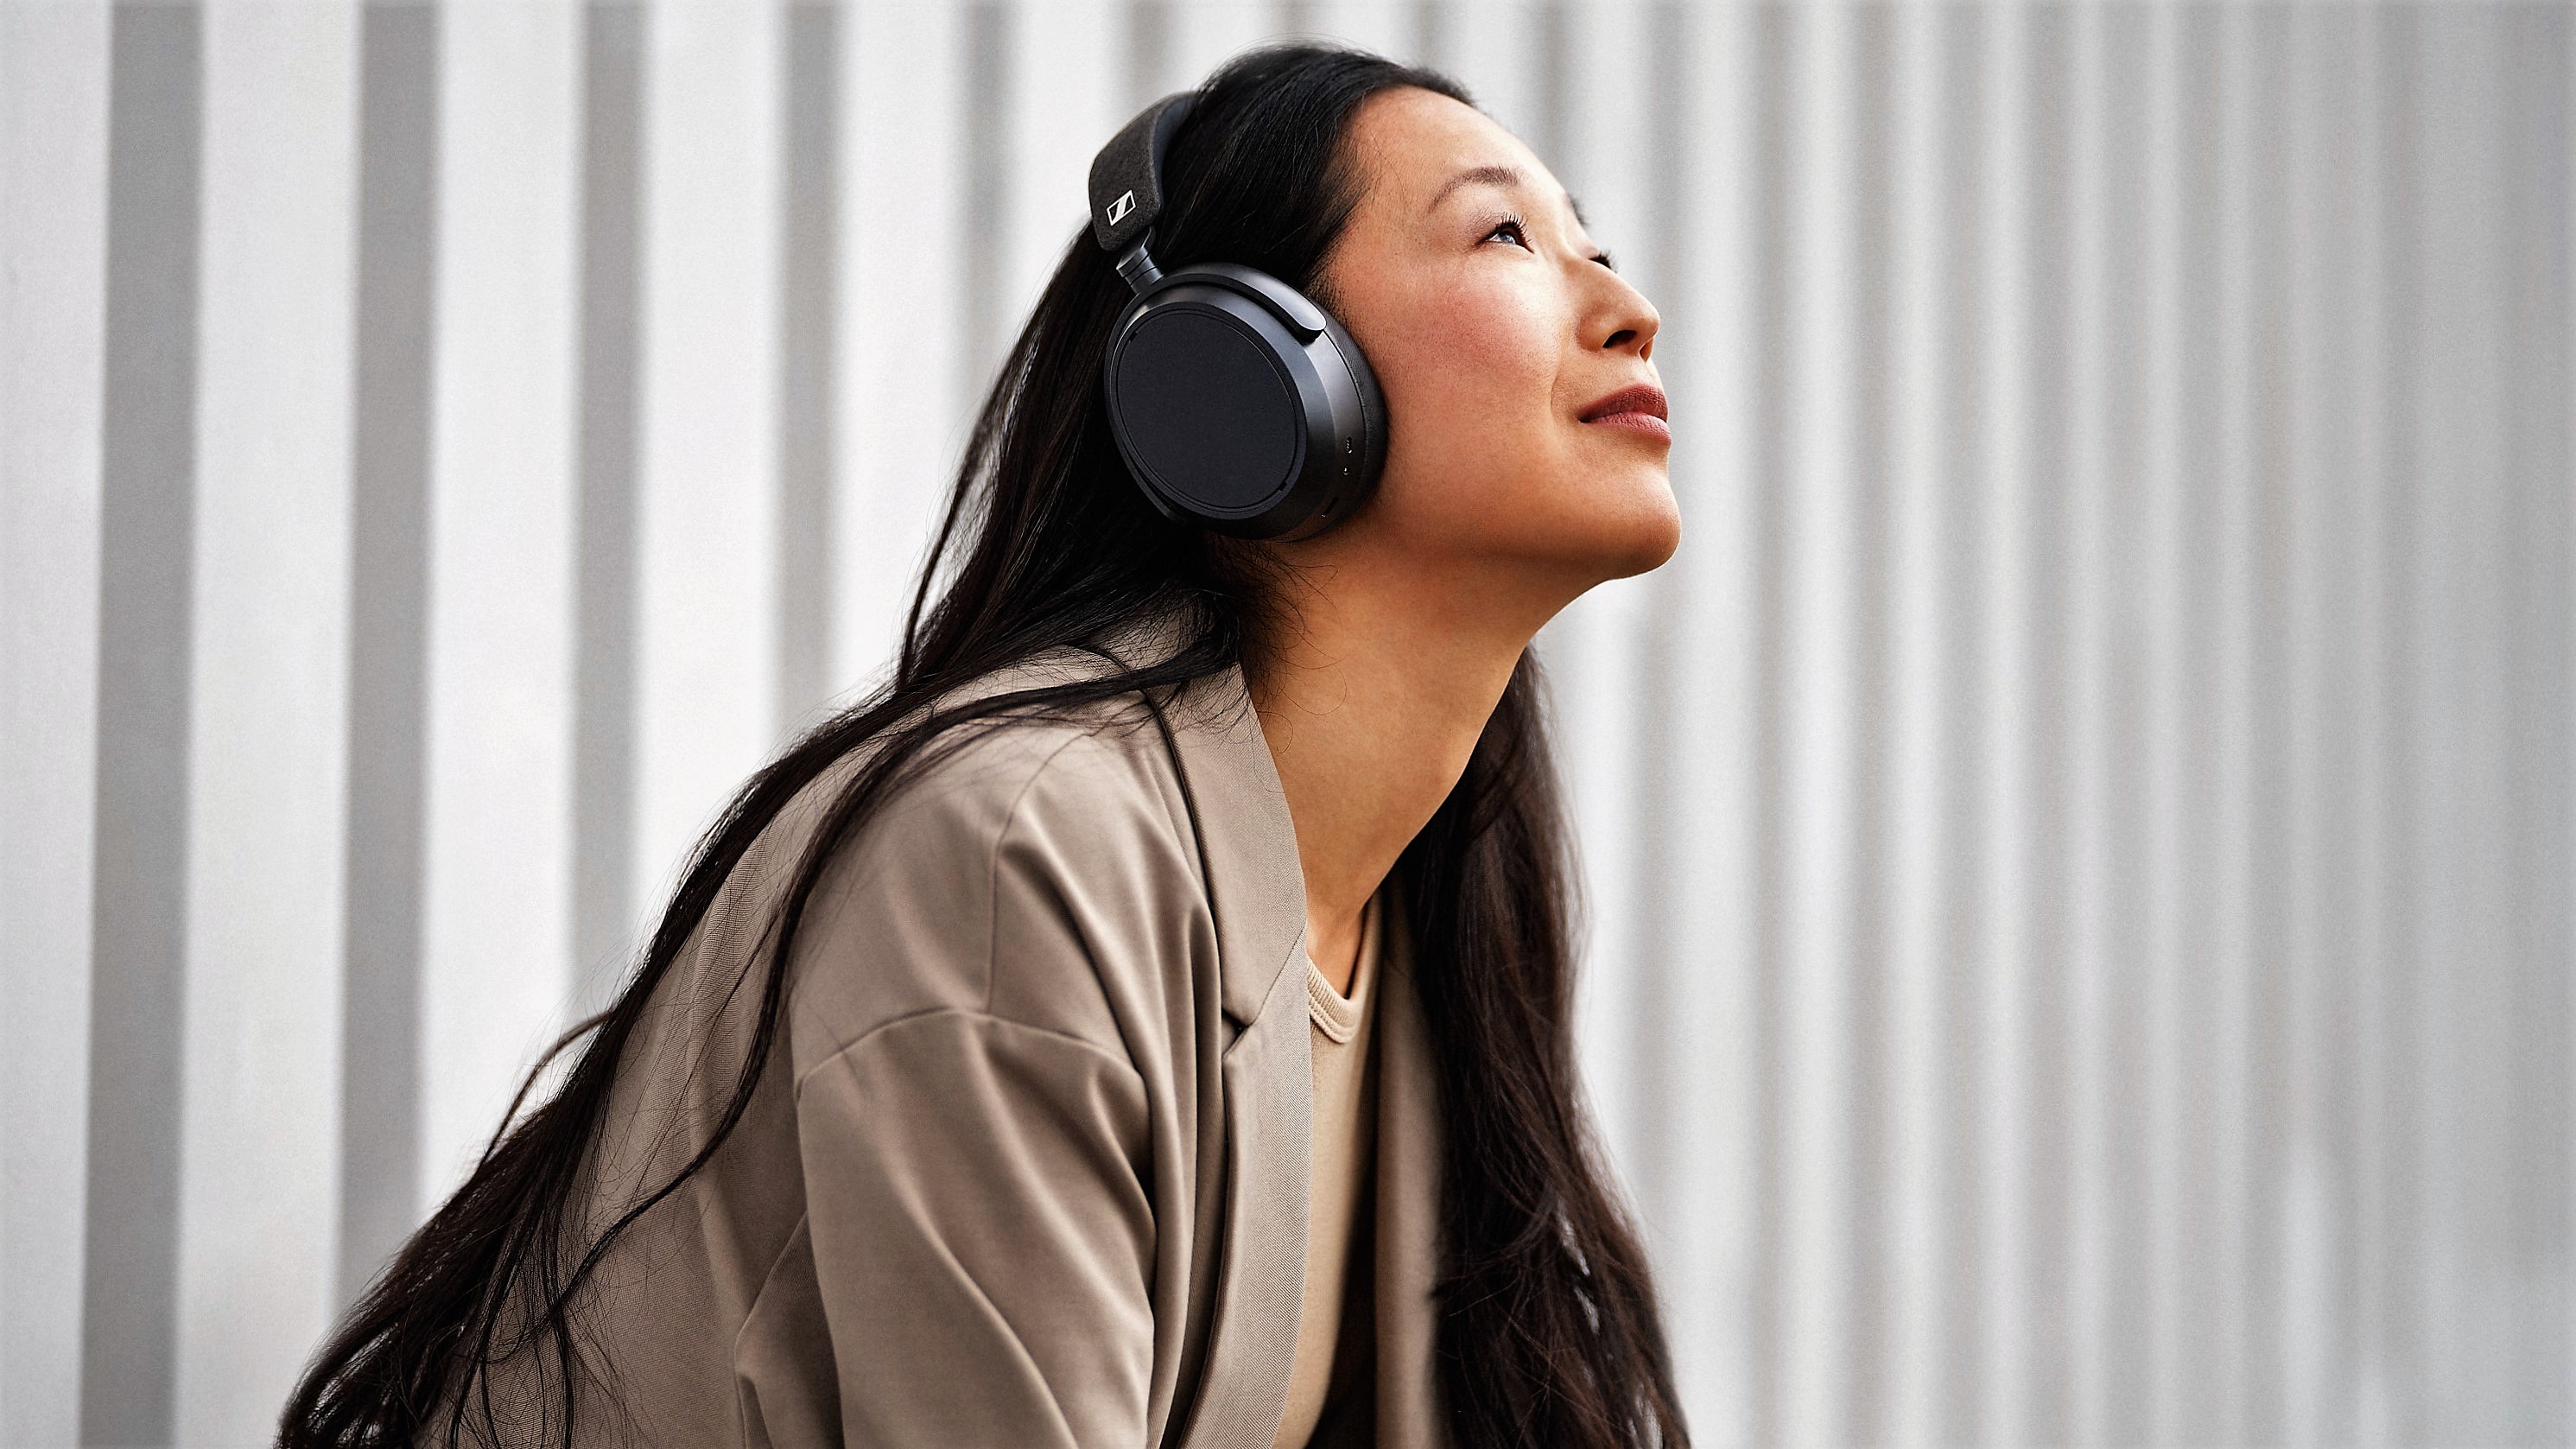 These noise-canceling headphones beat Sony's WH-1000XM5 — here's